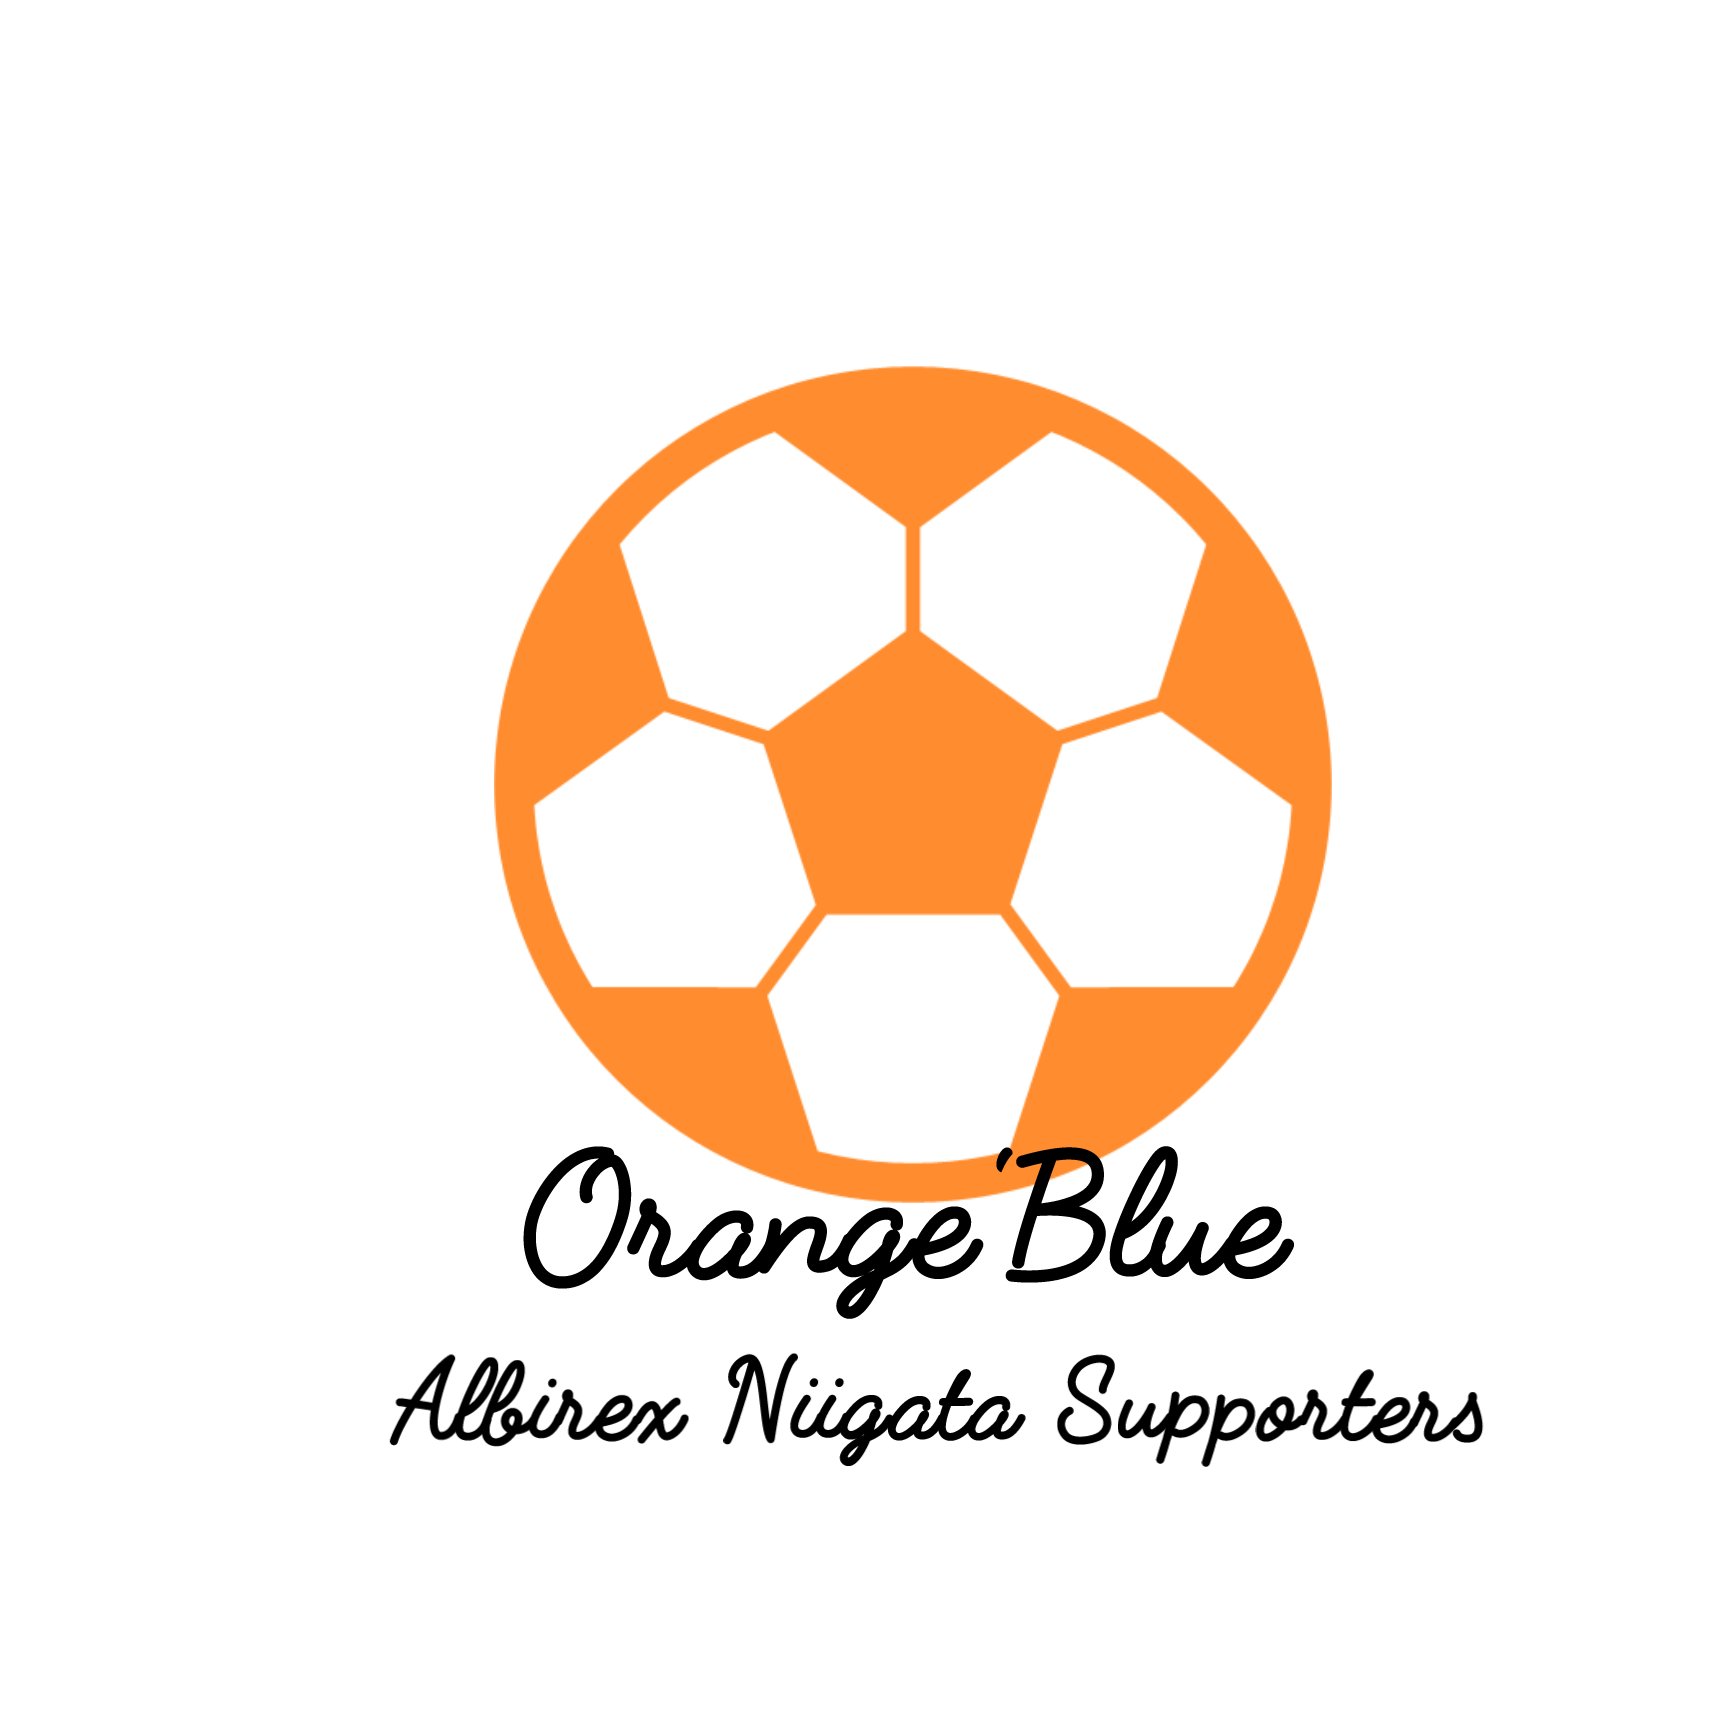 Unofficial Albirex Niigata Fan English Twitter by a Japanese who was born and raised in Niigata. Now I am back to Niigata!